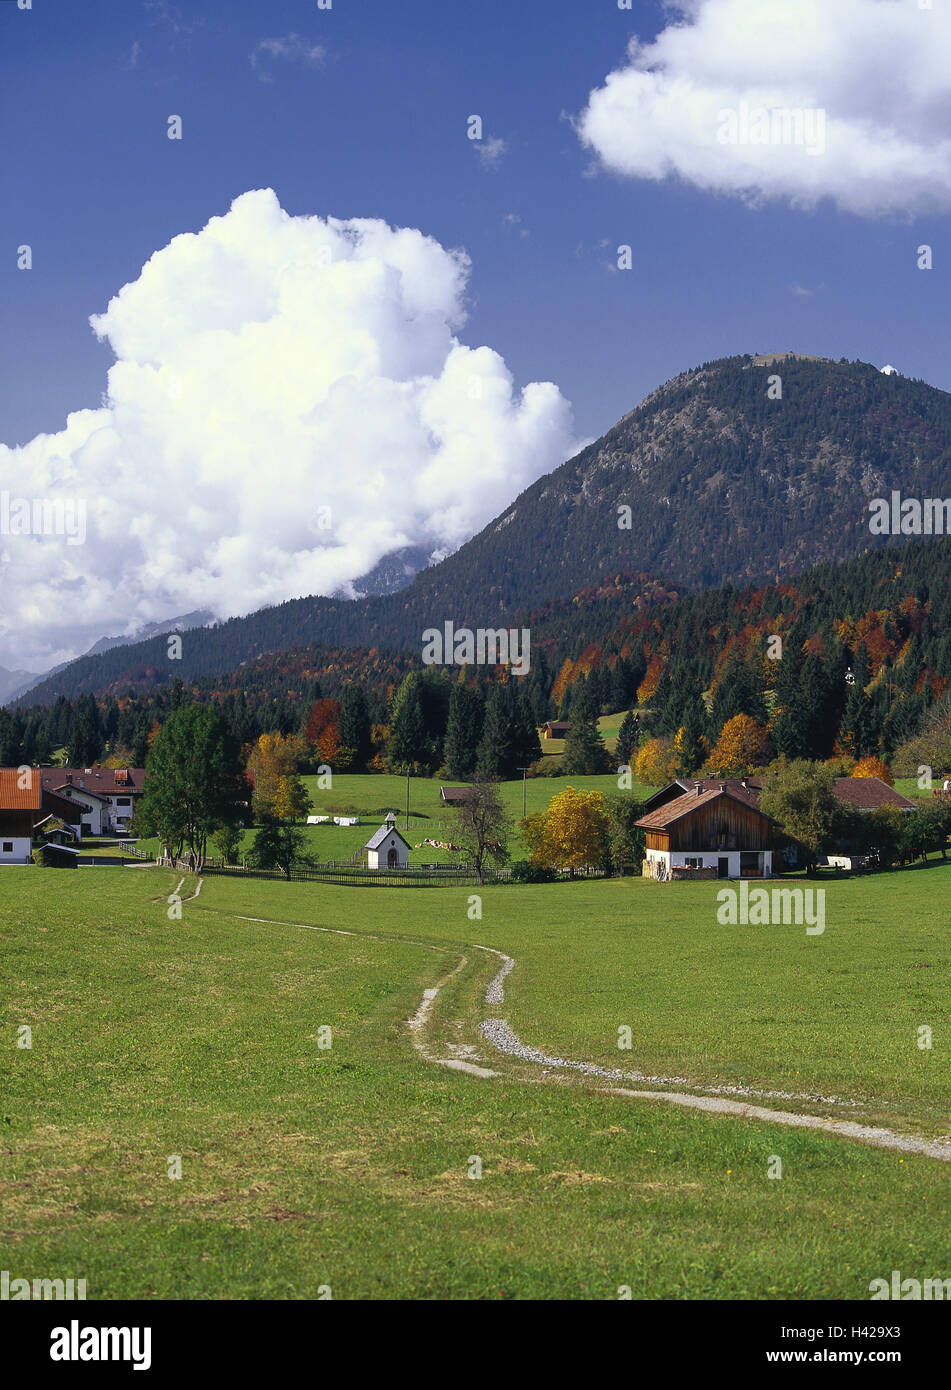 Germany, Bavaria, Gerold, meadows, country lane, farmhouses, Europe, South Germany, Upper Bavaria, Werdenfels, scenery, trees, wood, discoloration, autumn staining, autumn, season, heaven, clouds, mountains, houses, architecture, scenery, Idyll, Stock Photo